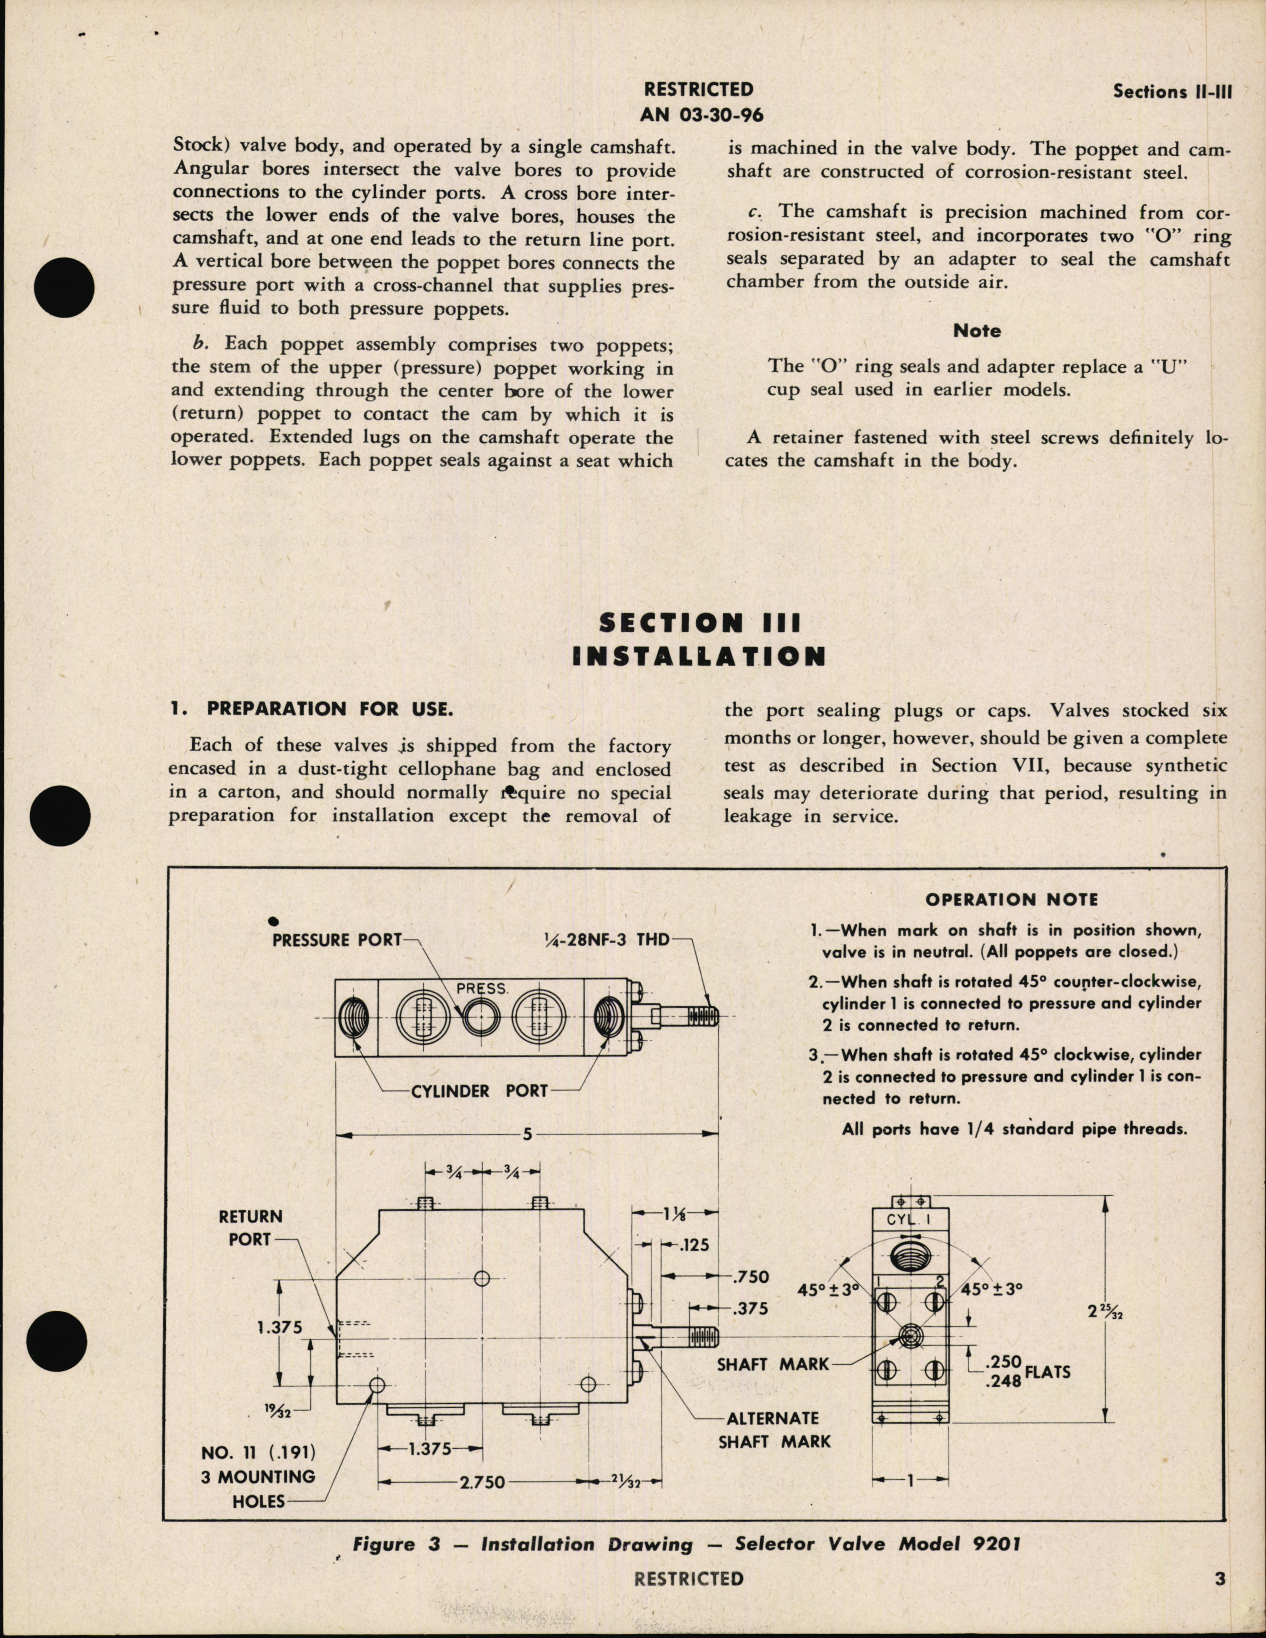 Sample page 7 from AirCorps Library document: Handbook of Instructions with Parts Catalog for Dural Seat Single Hydraulic Selector Valves